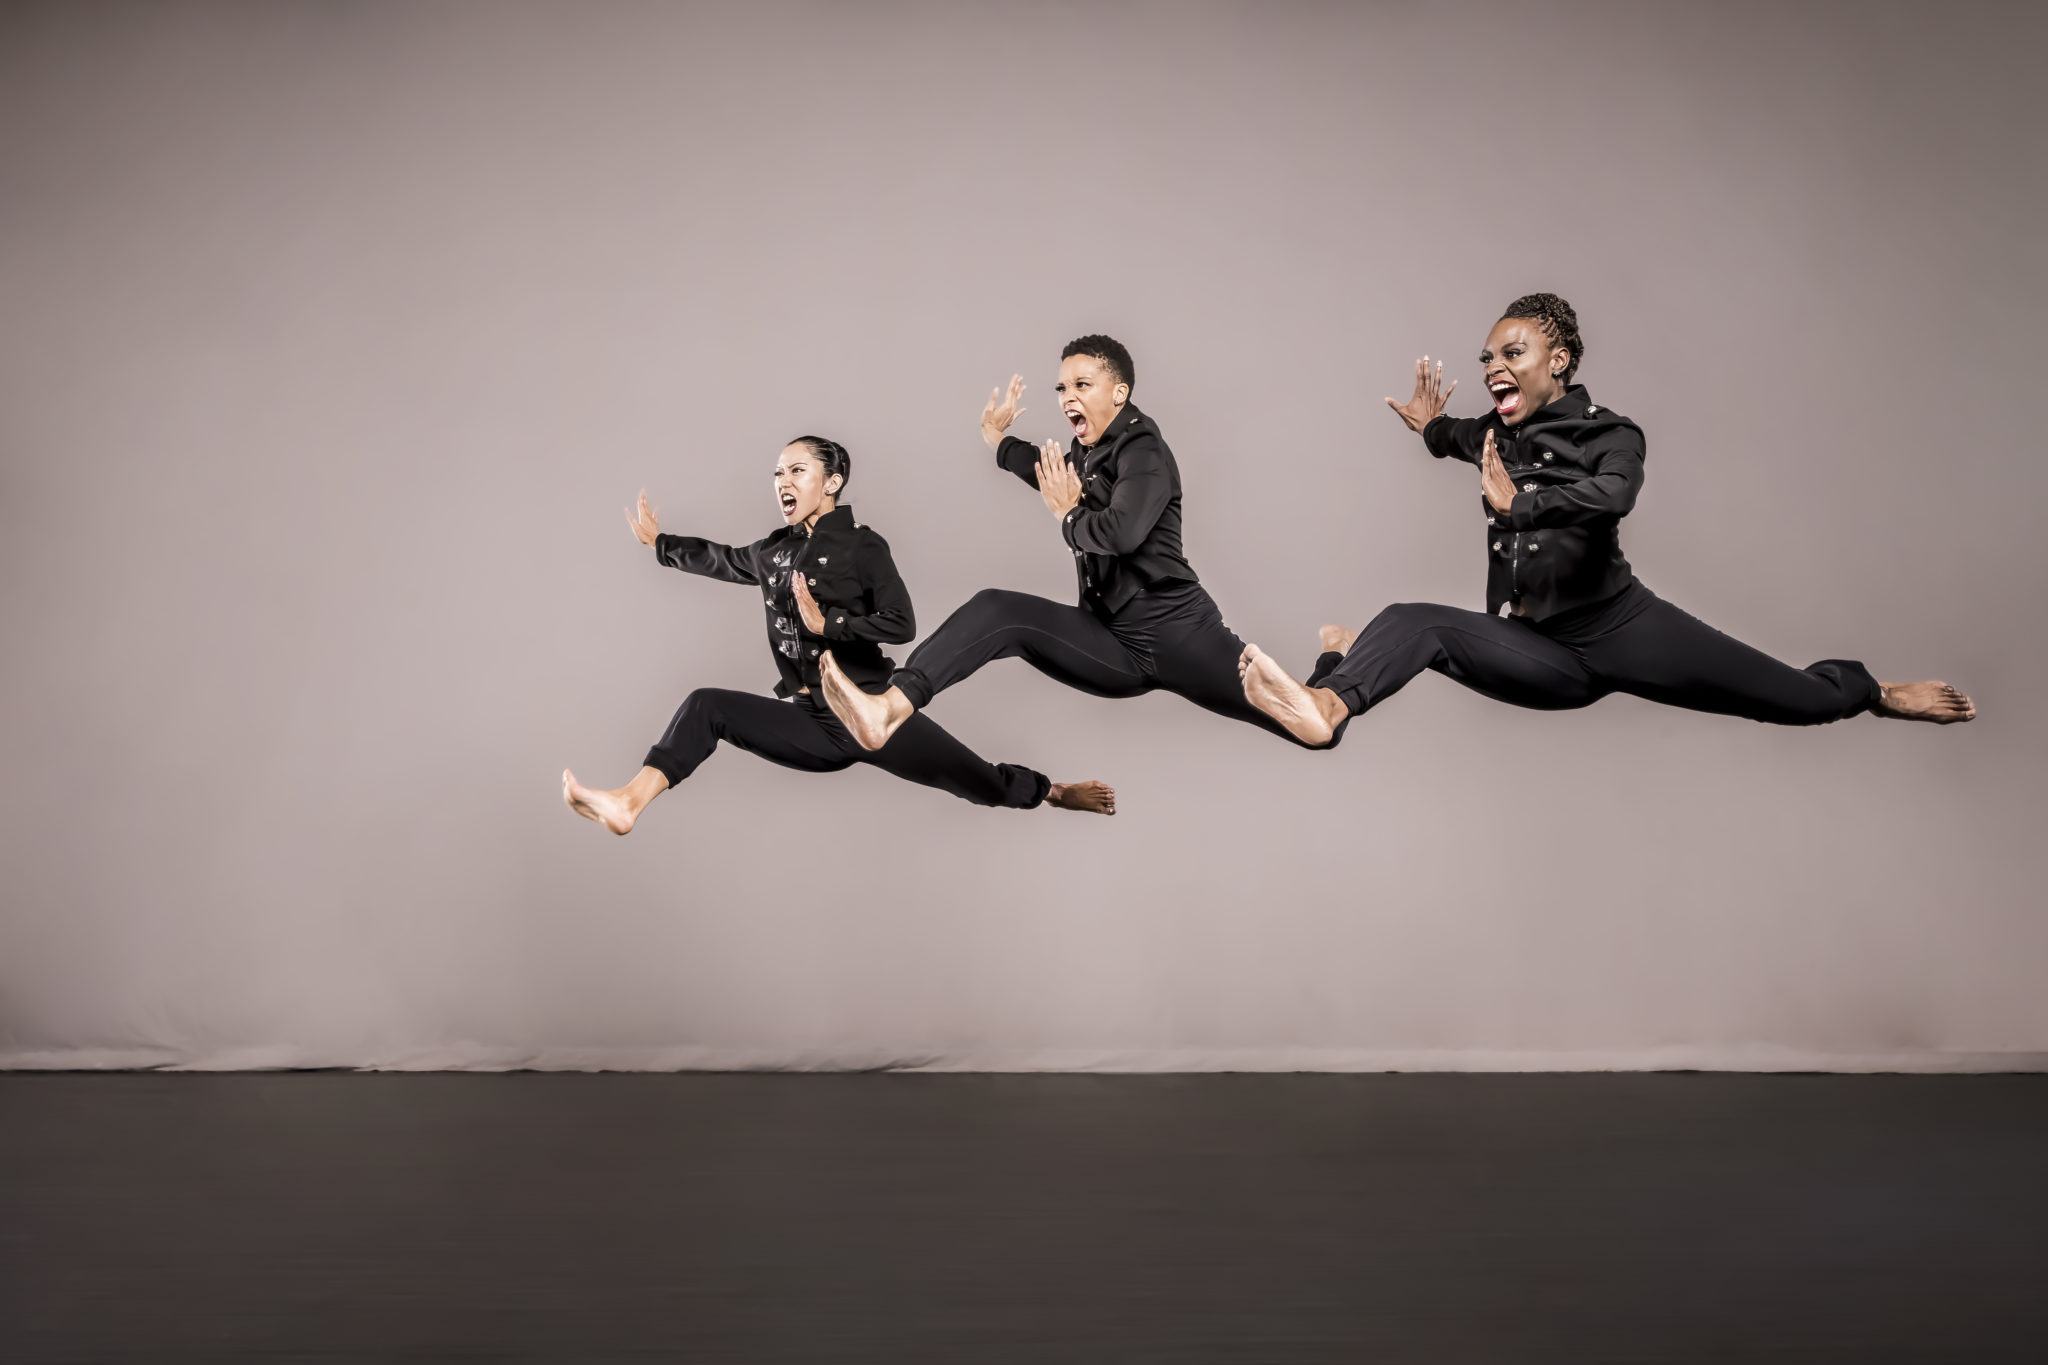 Three dancers leaping in unison.